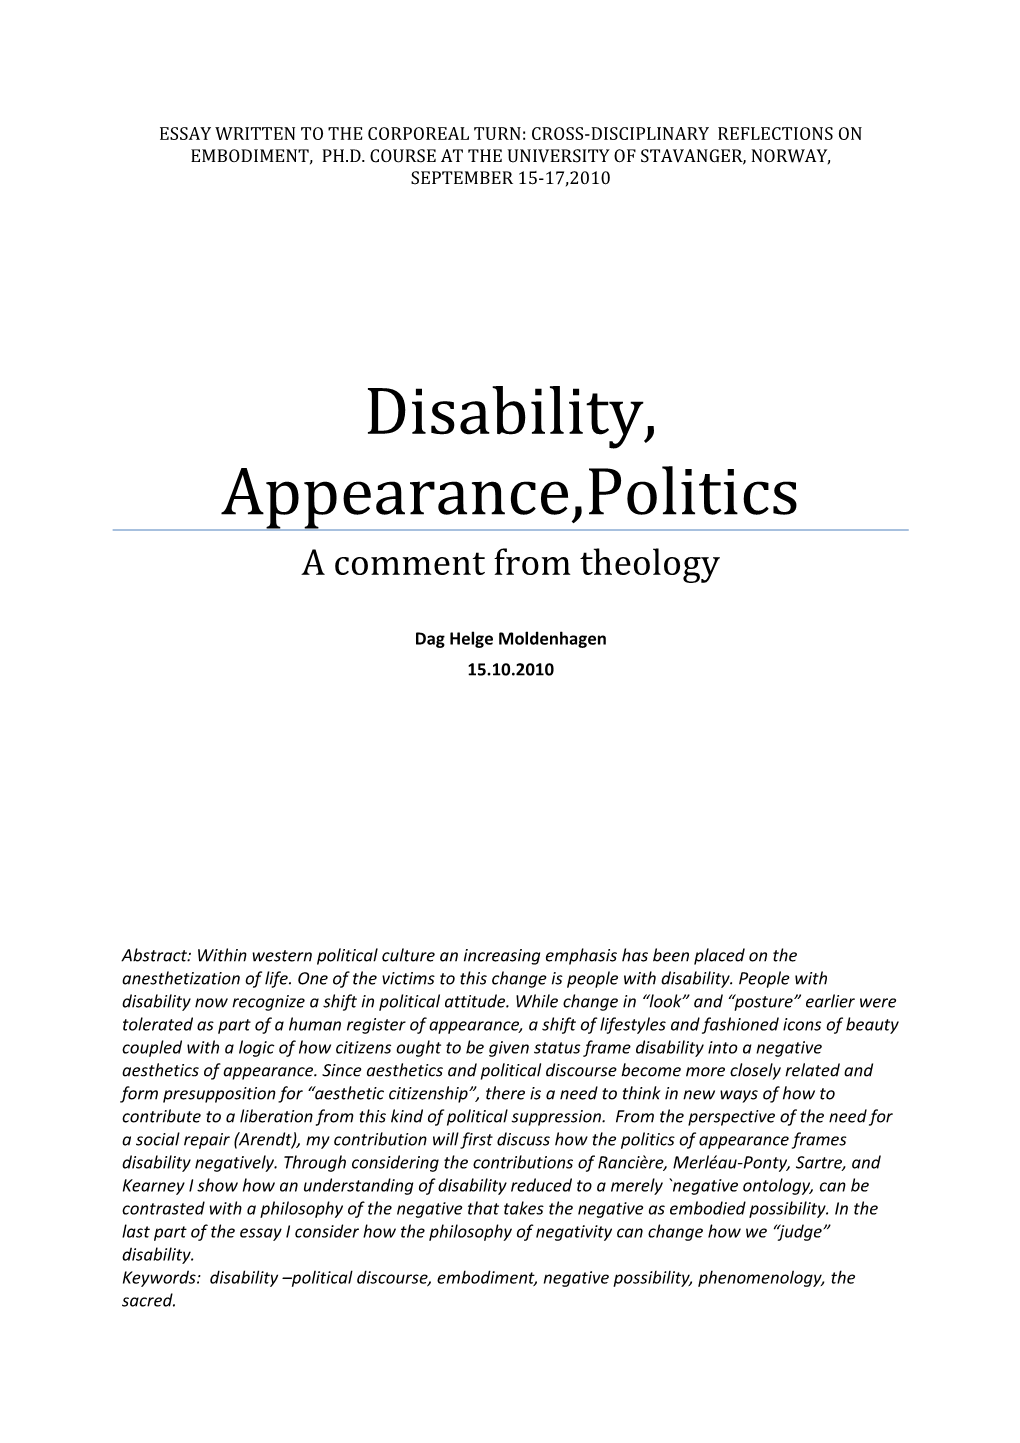 Disability and the Politics of Appearance 12 Okt